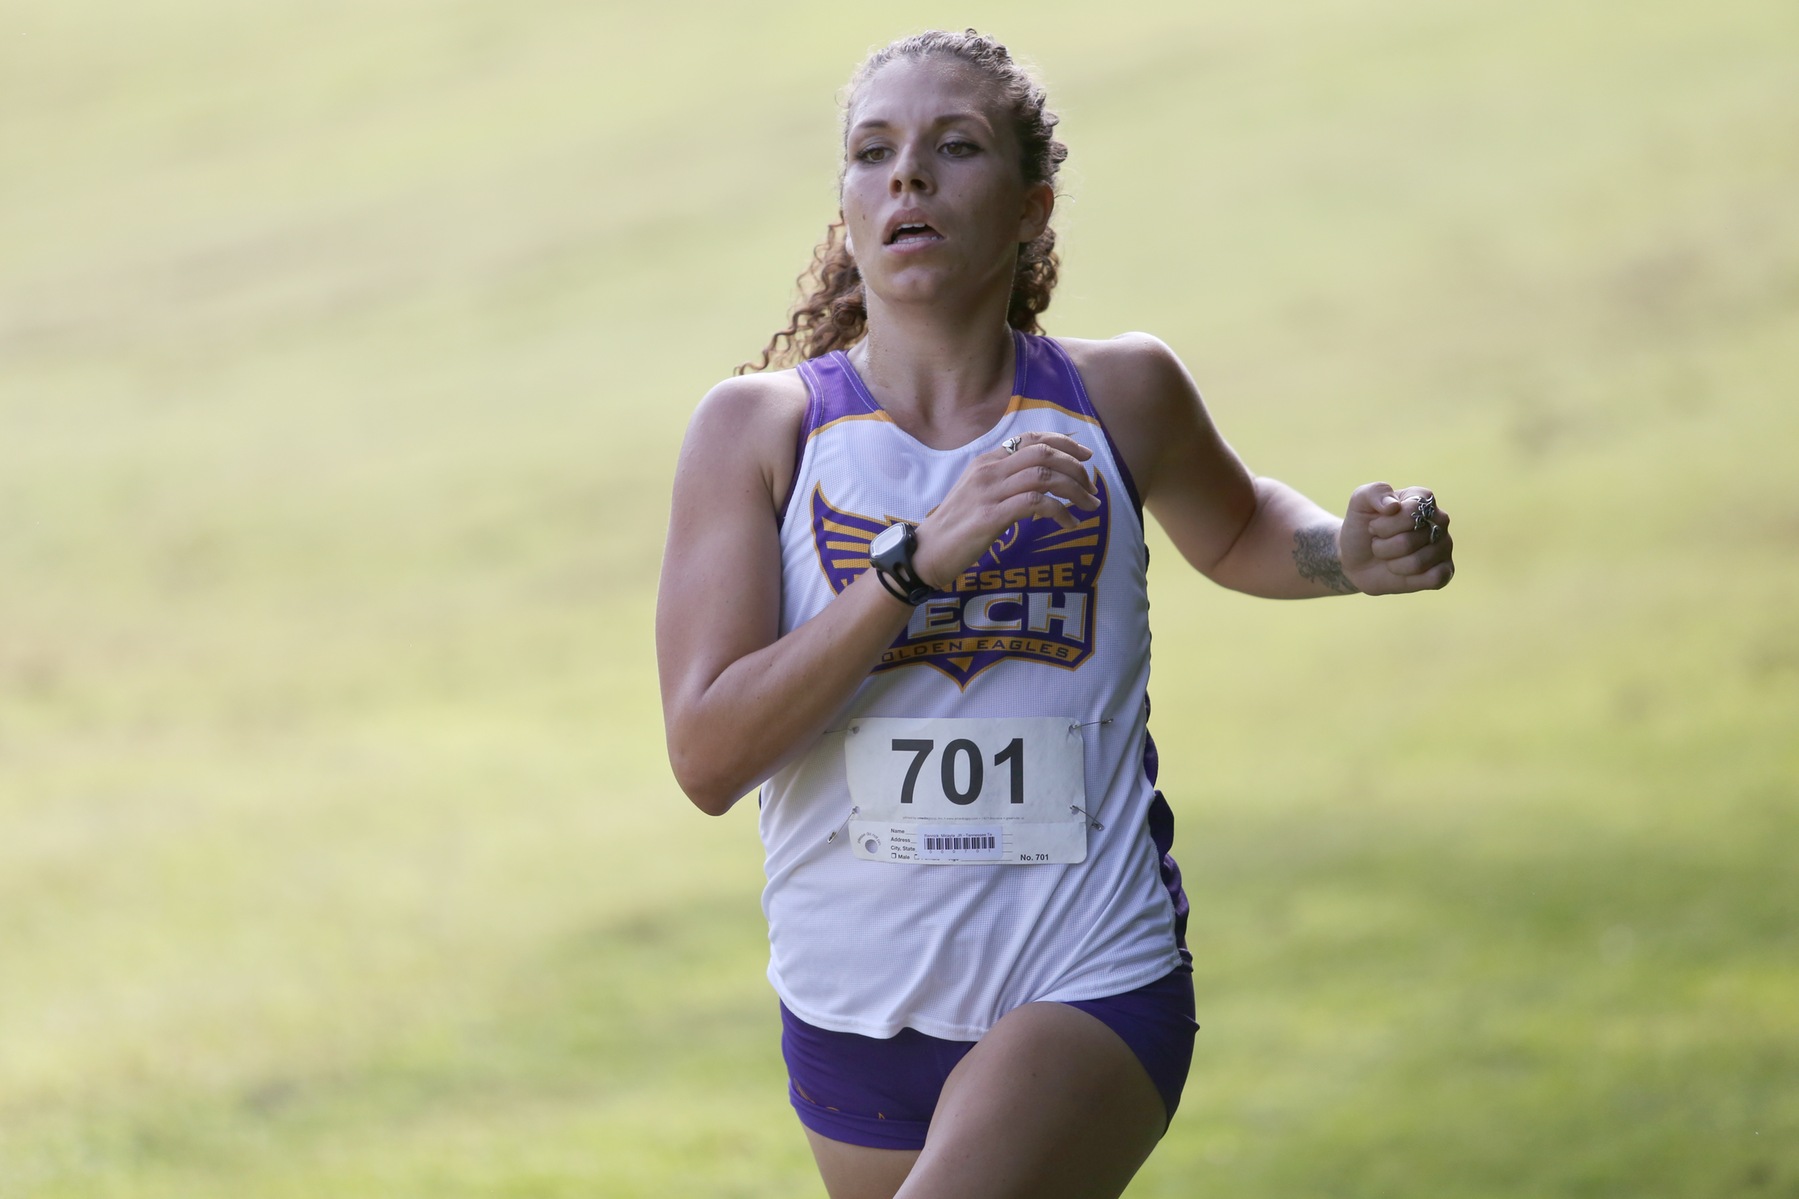 Tech cross country to open at home with Golden Eagle Invitational presented by Hometown IGA